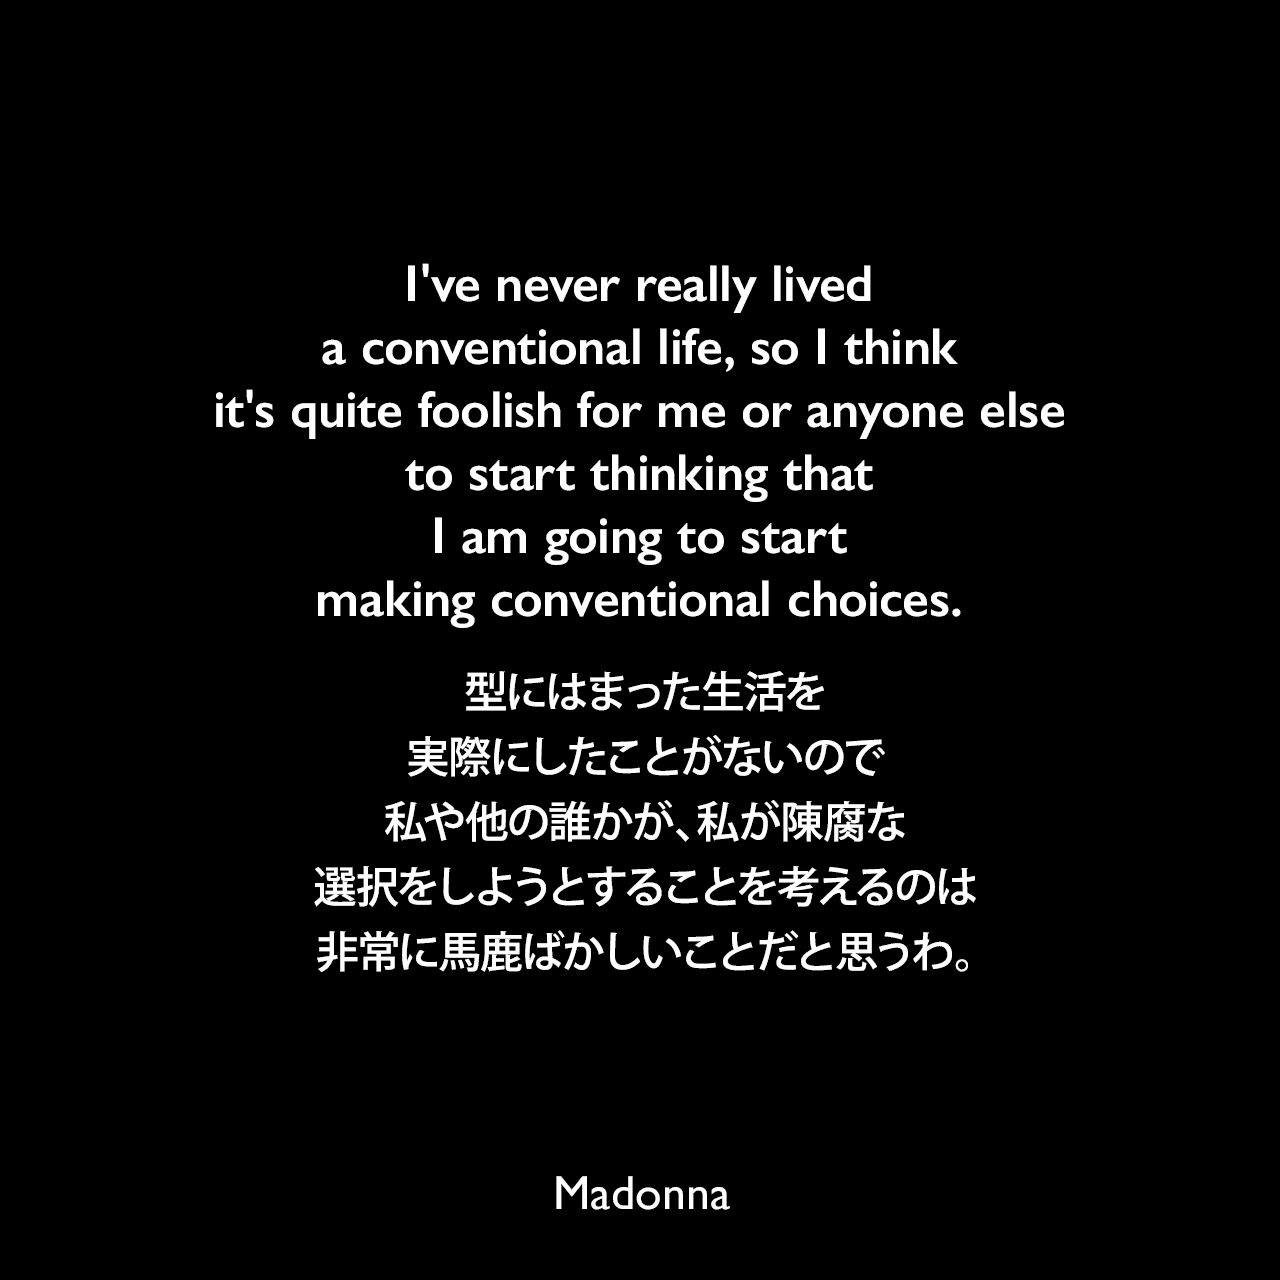 I've never really lived a conventional life, so I think it's quite foolish for me or anyone else to start thinking that I am going to start making conventional choices.型にはまった生活を実際にしたことがないので、私や他の誰かが、私が陳腐な選択をしようとすることを考えるのは非常に馬鹿ばかしいことだと思うわ。Madonna